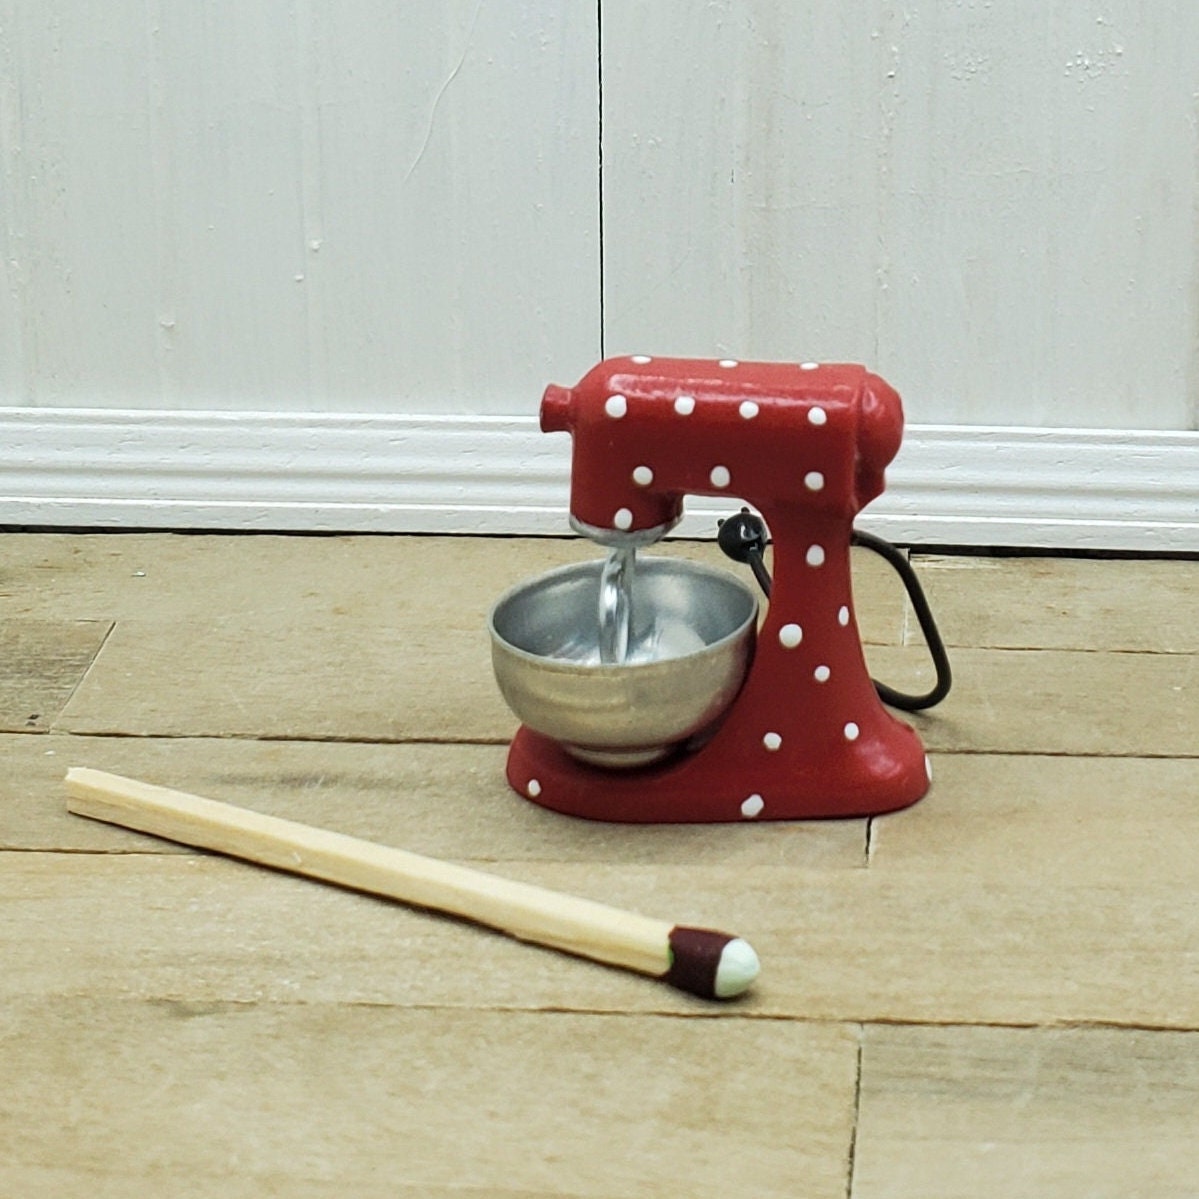 1:12 Scale Metal Mixer With Removable Dollhouse Miniature Bowl and